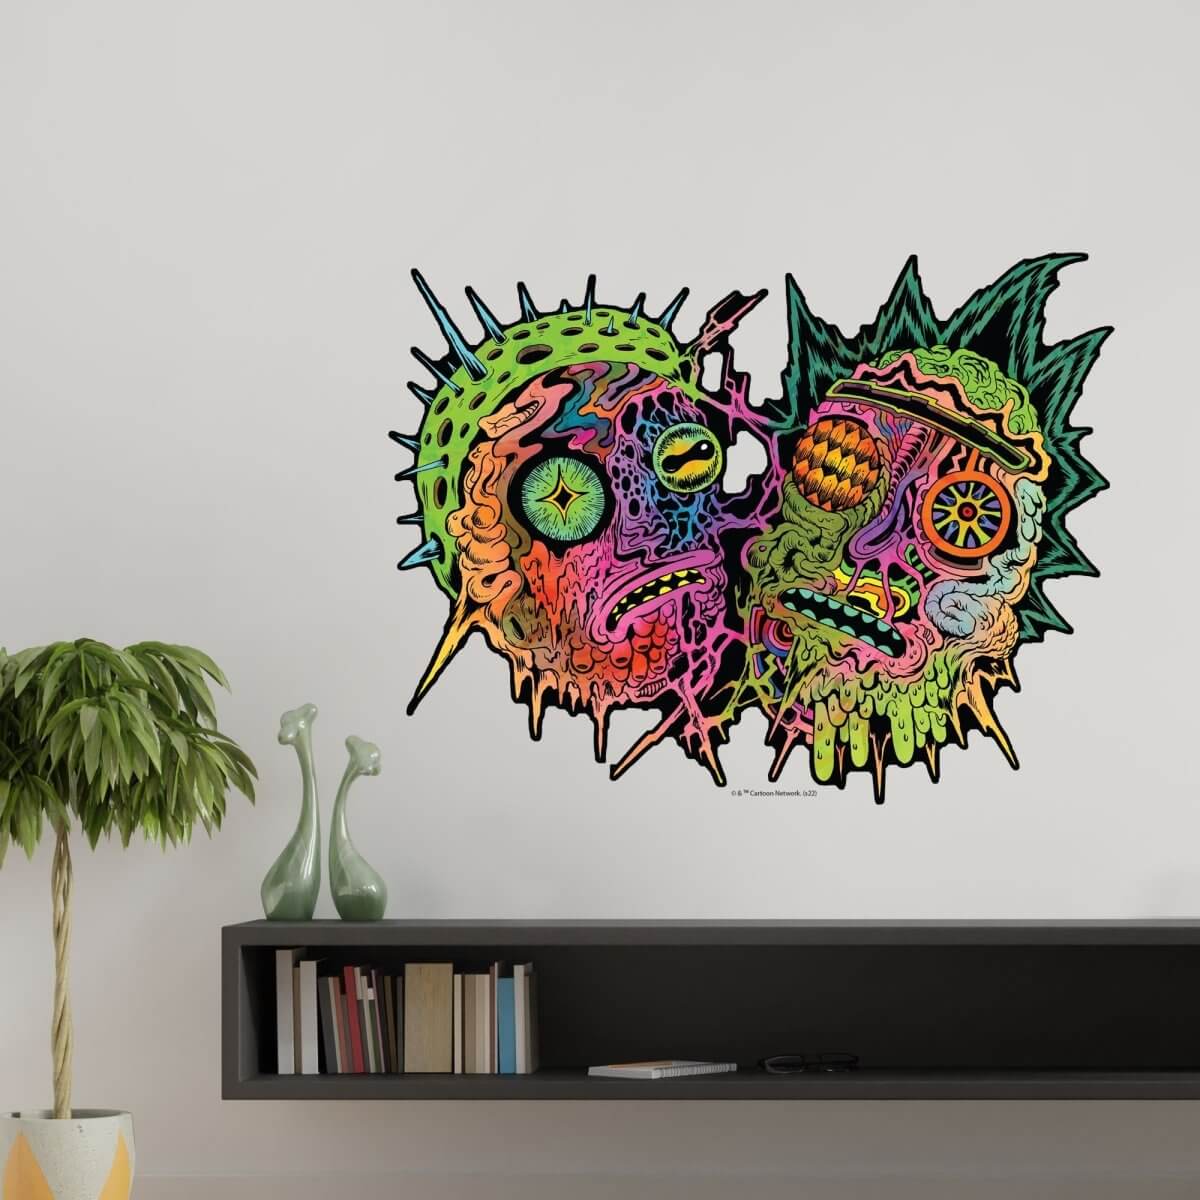 Kismet Decals Rick & Morty Psychedelic Monsters 1 Licensed Wall Sticker - Easy DIY Home & Kids Room Decor Wall Decal Art - Kismet Decals